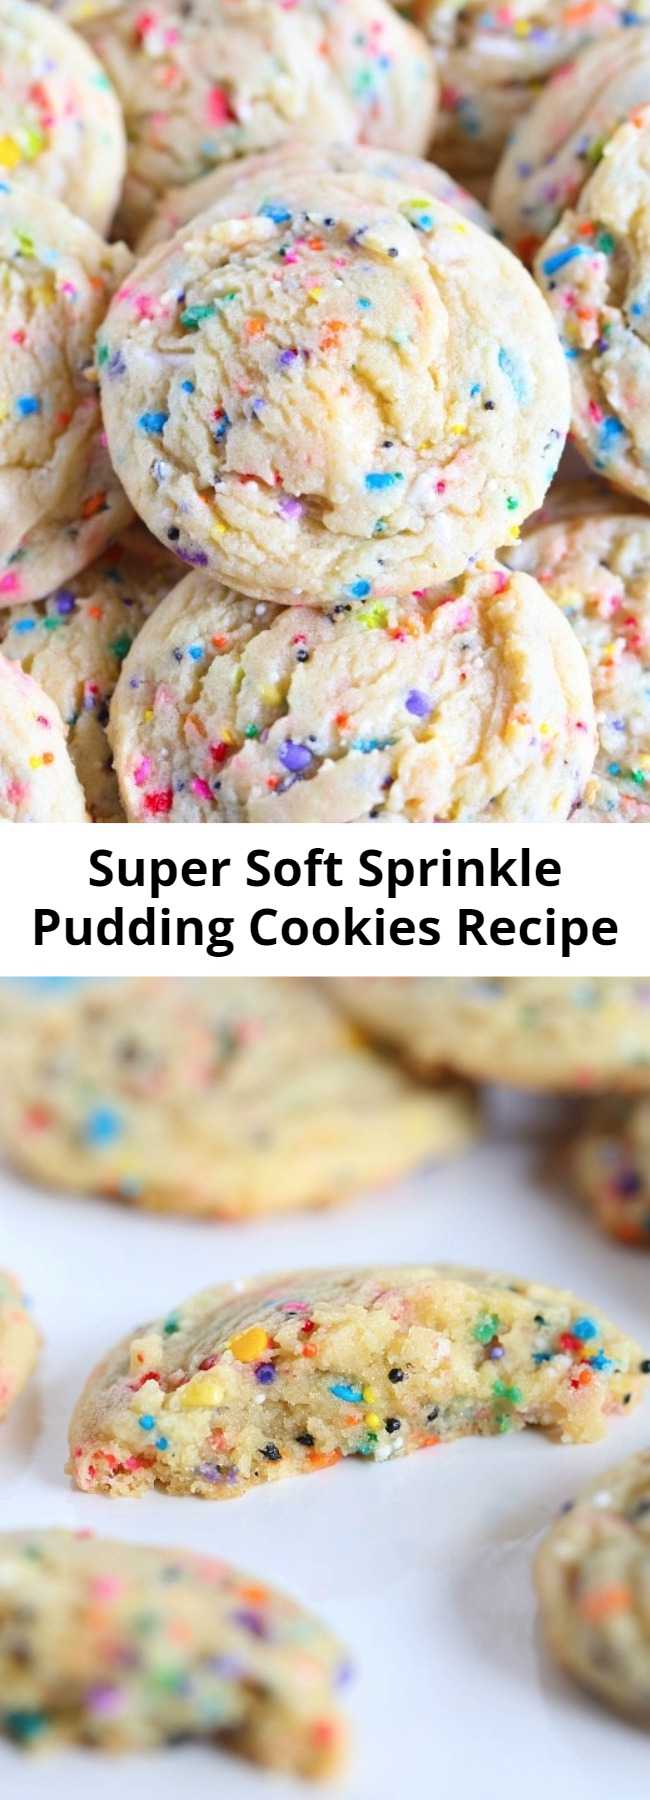 Super Soft Sprinkle Pudding Cookies Recipe - These soft sprinkle sugar cookies are made with a pudding mix! These SUPER SOFT Sprinkle Pudding cookies are so so easy and loaded with vanilla flavor! This is the best sprinkle cookie recipe to make because it’s so easy, buttery, and delicious!